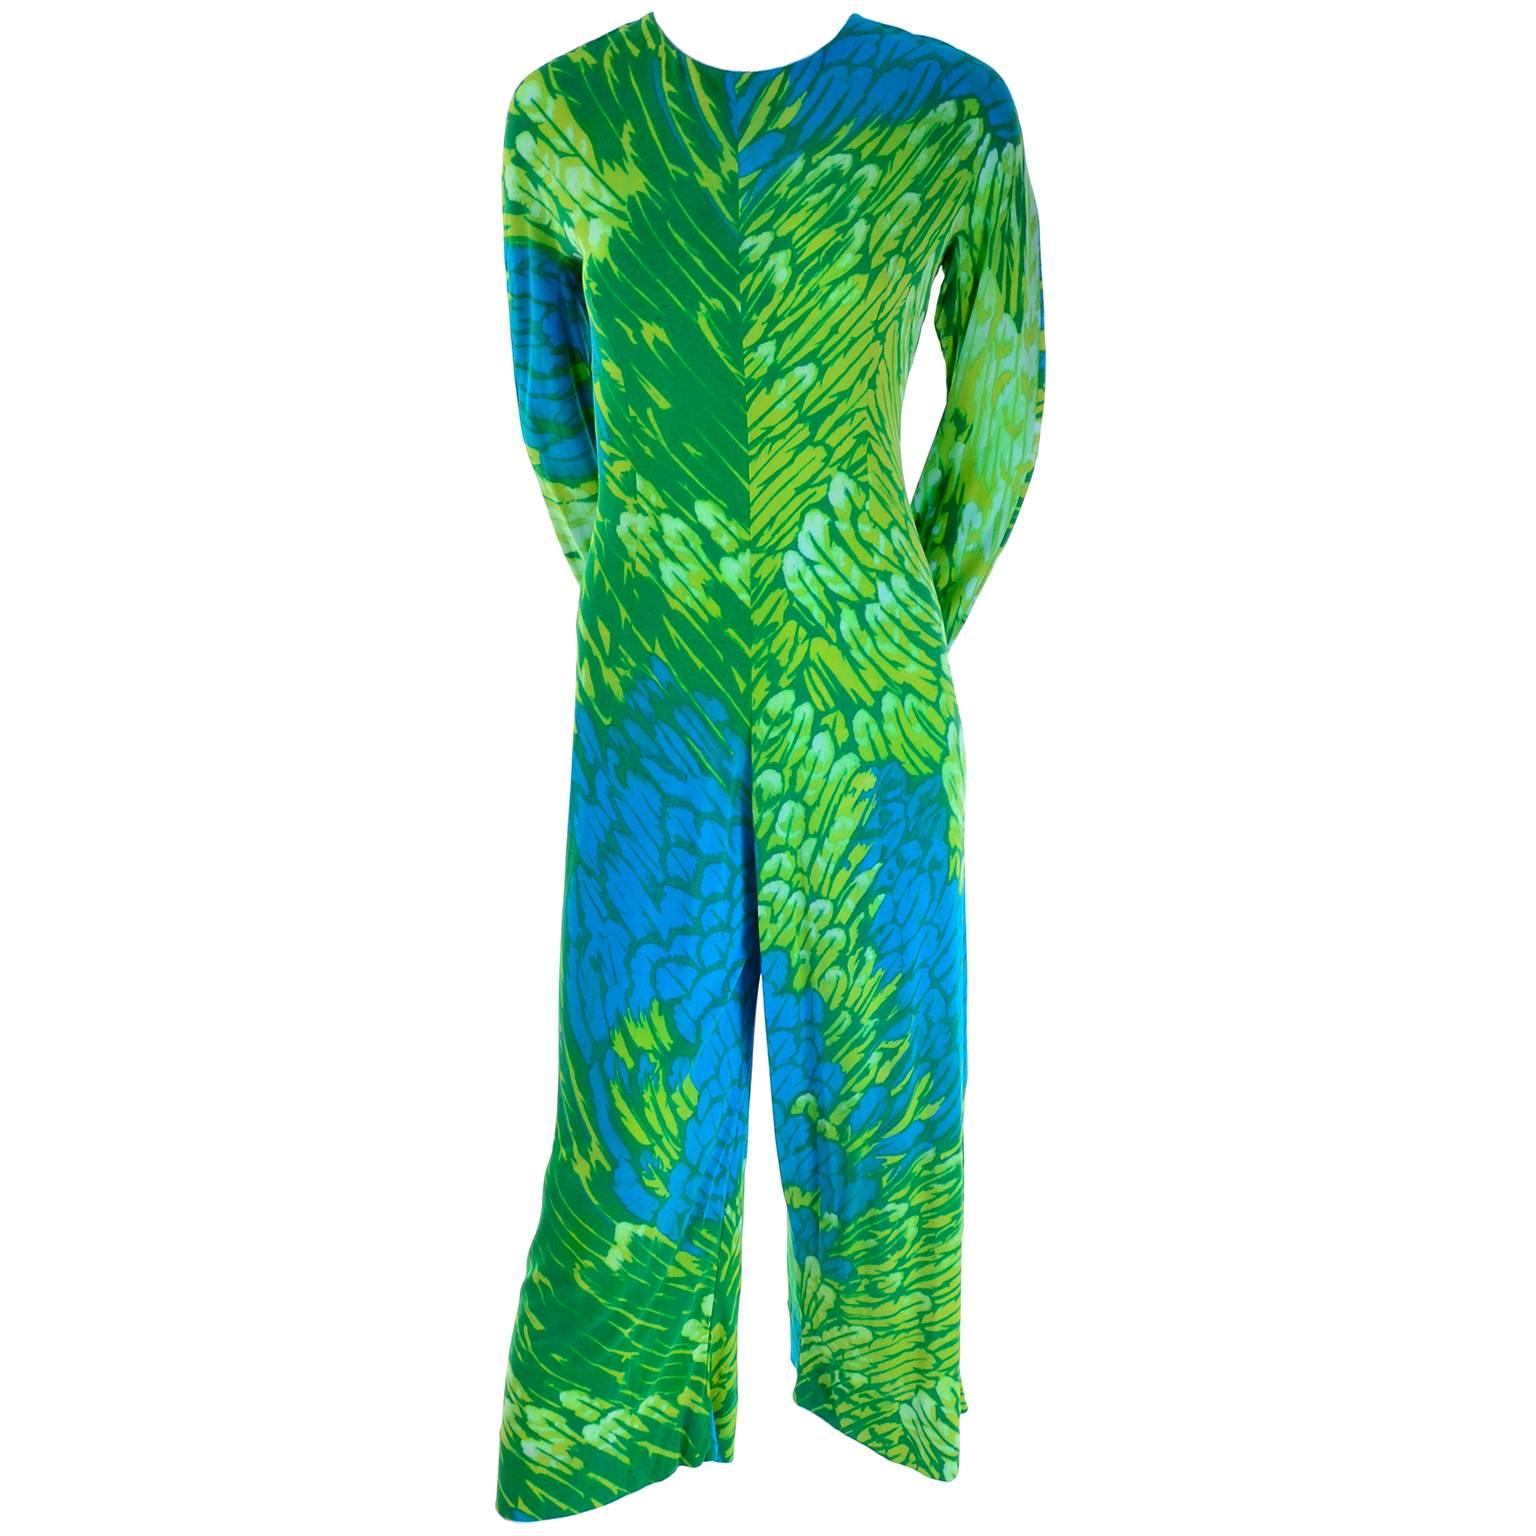 This vintage silk jersey jumpsuit is from the late 1960's or early 1970's and it comes with a matching sheer silk chiffon one shoulder sarong that slips over your head. The jumpsuit has a great abstract blue and green print, it zips up the back and